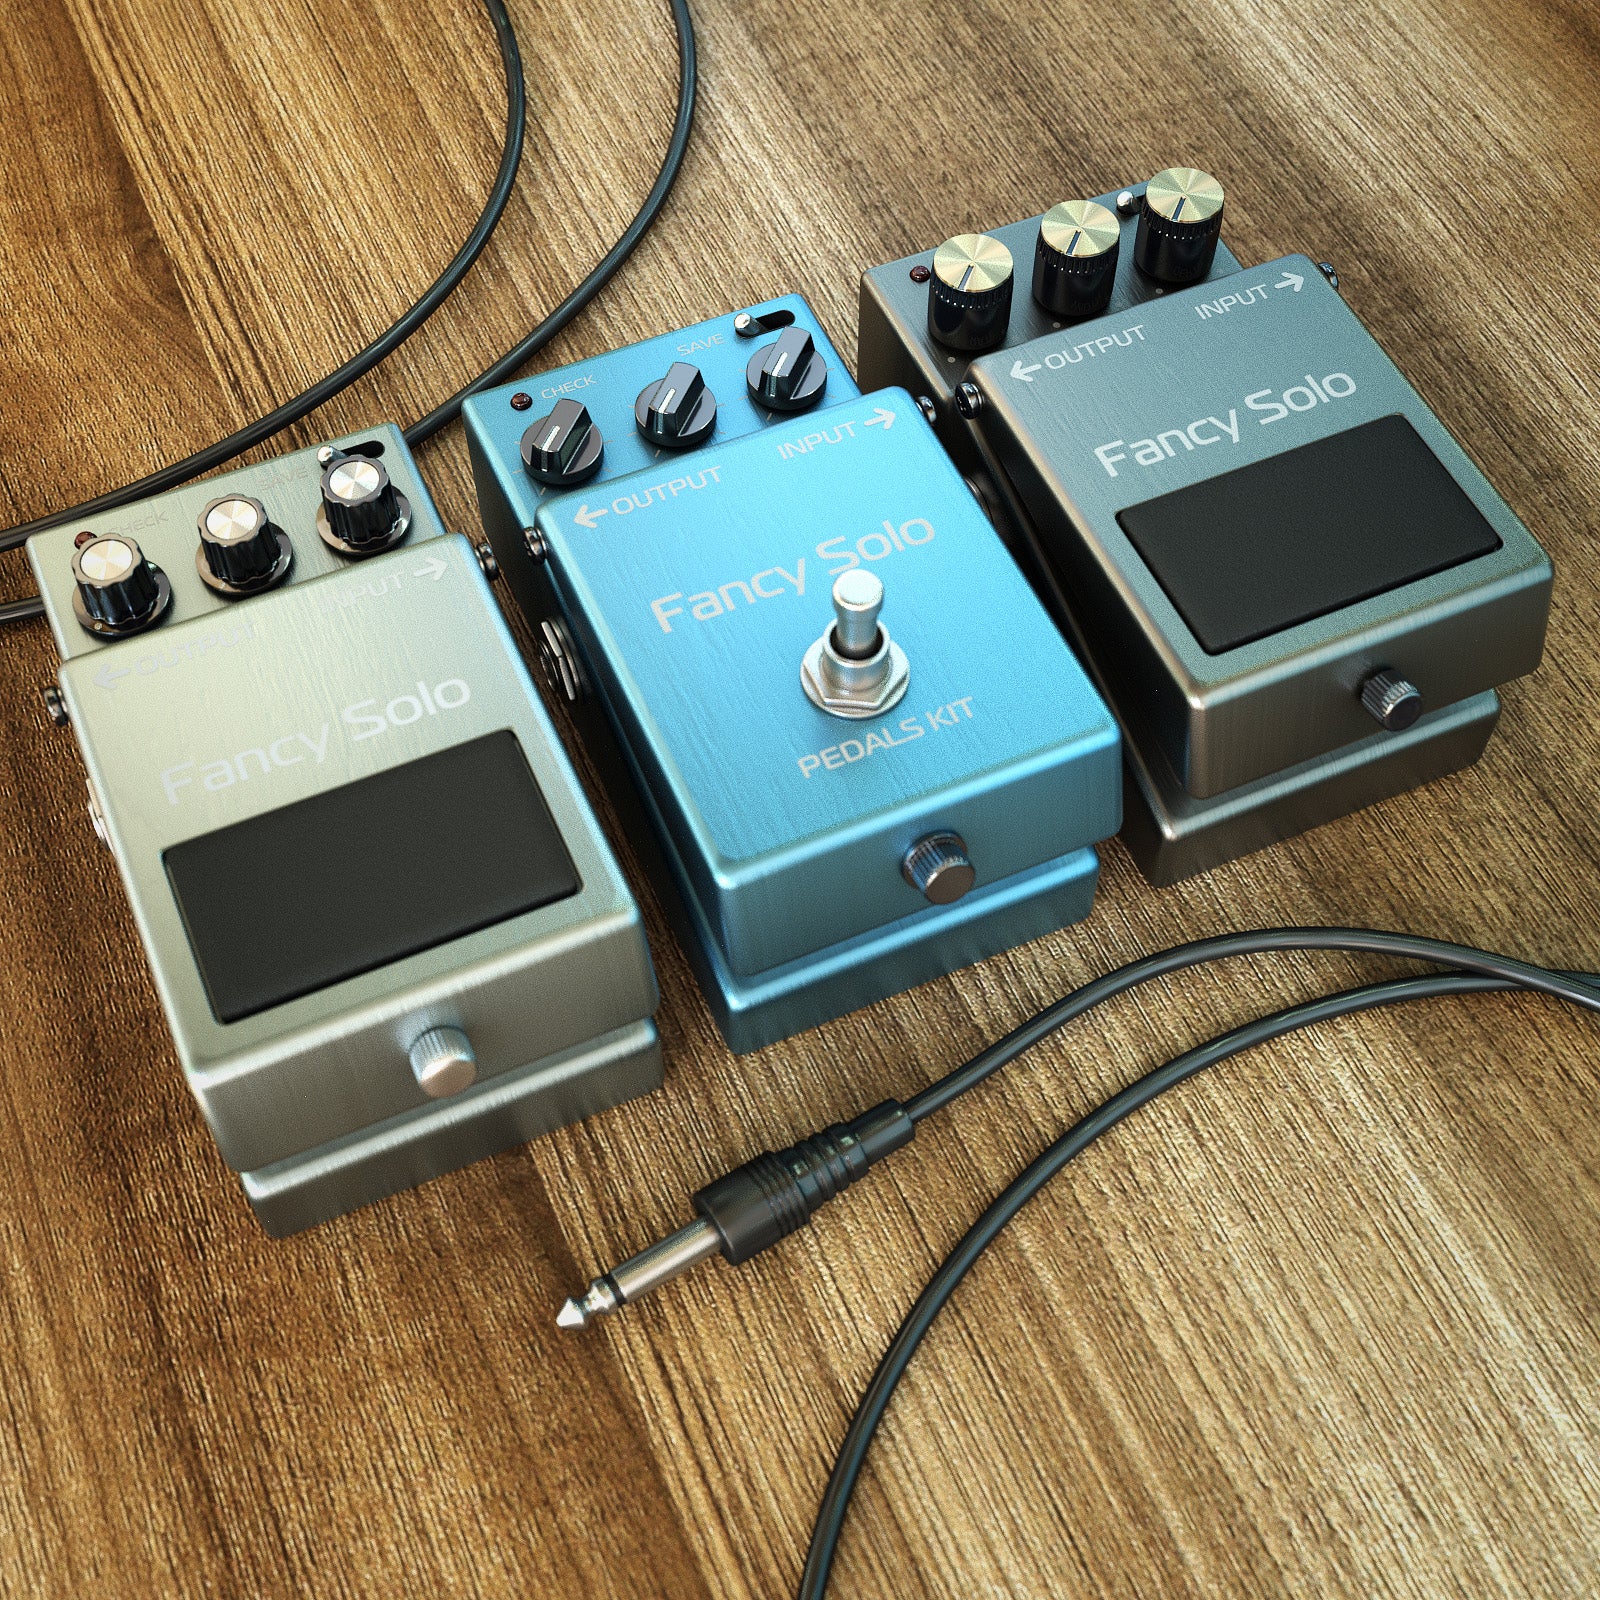 Steel guitar pedals Ui for audio device 3D models